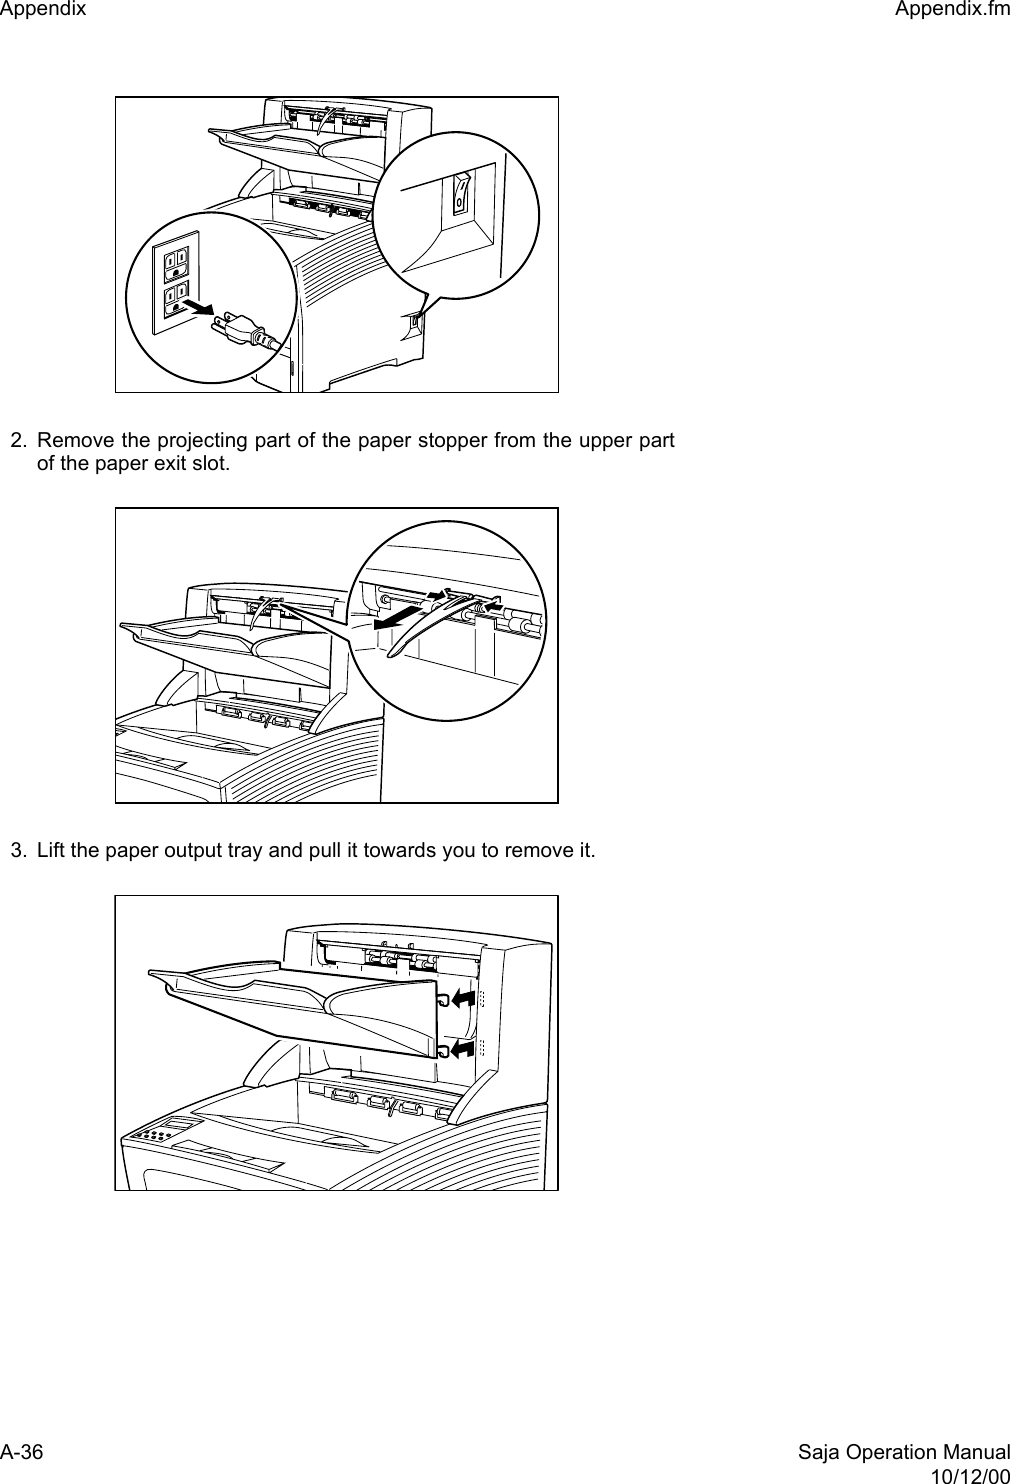 A-36 Saja Operation Manual10/12/00Appendix  Appendix.fm2. Remove the projecting part of the paper stopper from the upper partof the paper exit slot.3. Lift the paper output tray and pull it towards you to remove it.